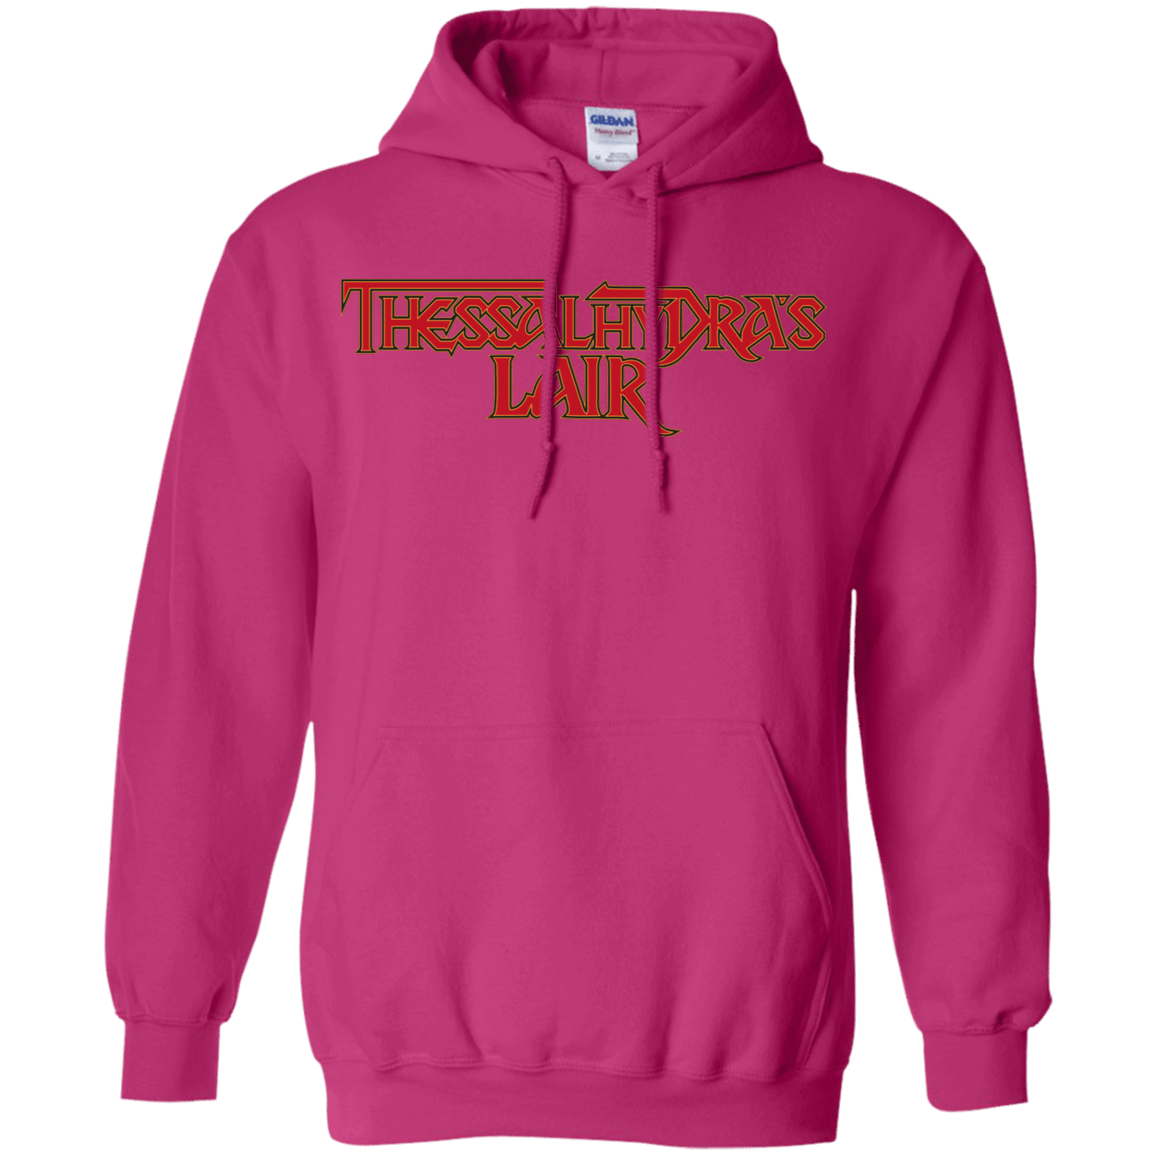 Sweatshirts Heliconia / S Thessalhydras Lair Pullover Hoodie